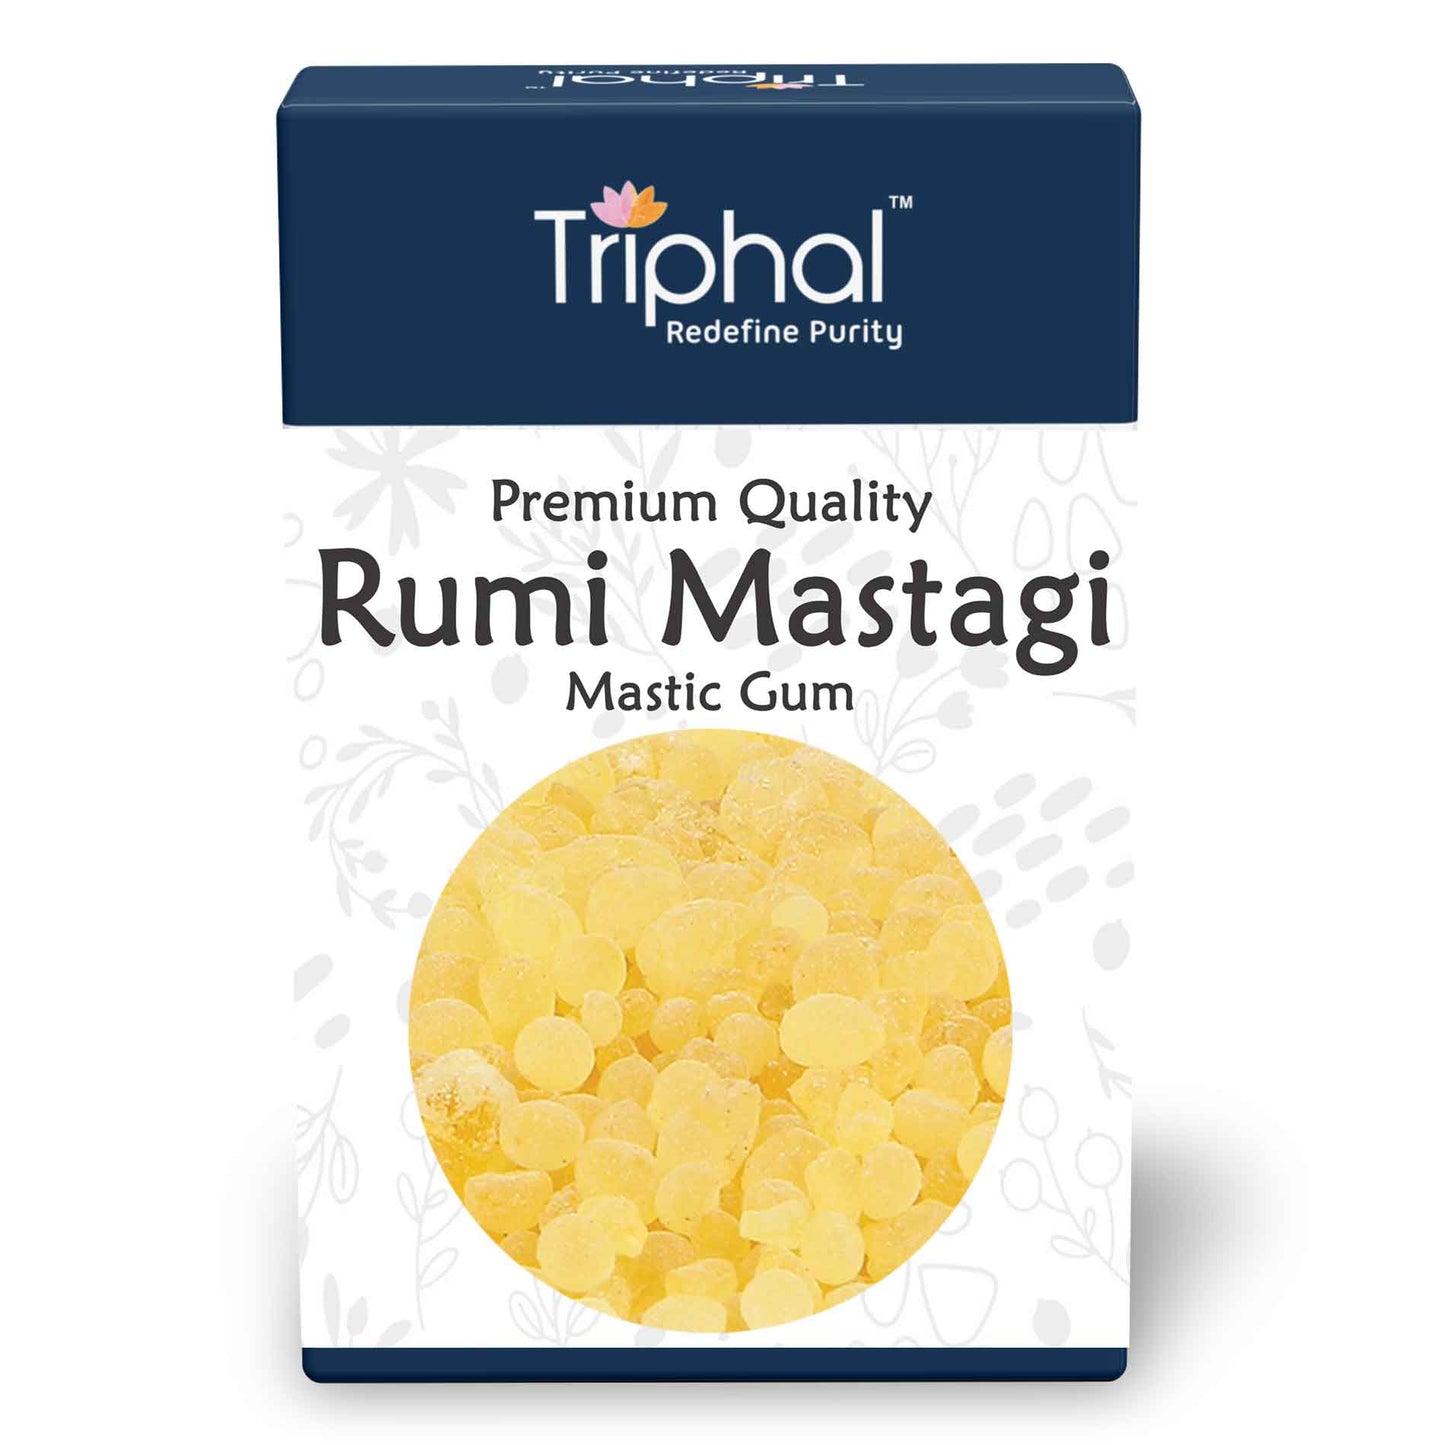 Image of a box of Rumi Mastagi by Triphal, a brand of mastic gum also known as mastika or mastagi or mastiha. The box contains small, translucent, yellowish-white resin pieces of mastic gum